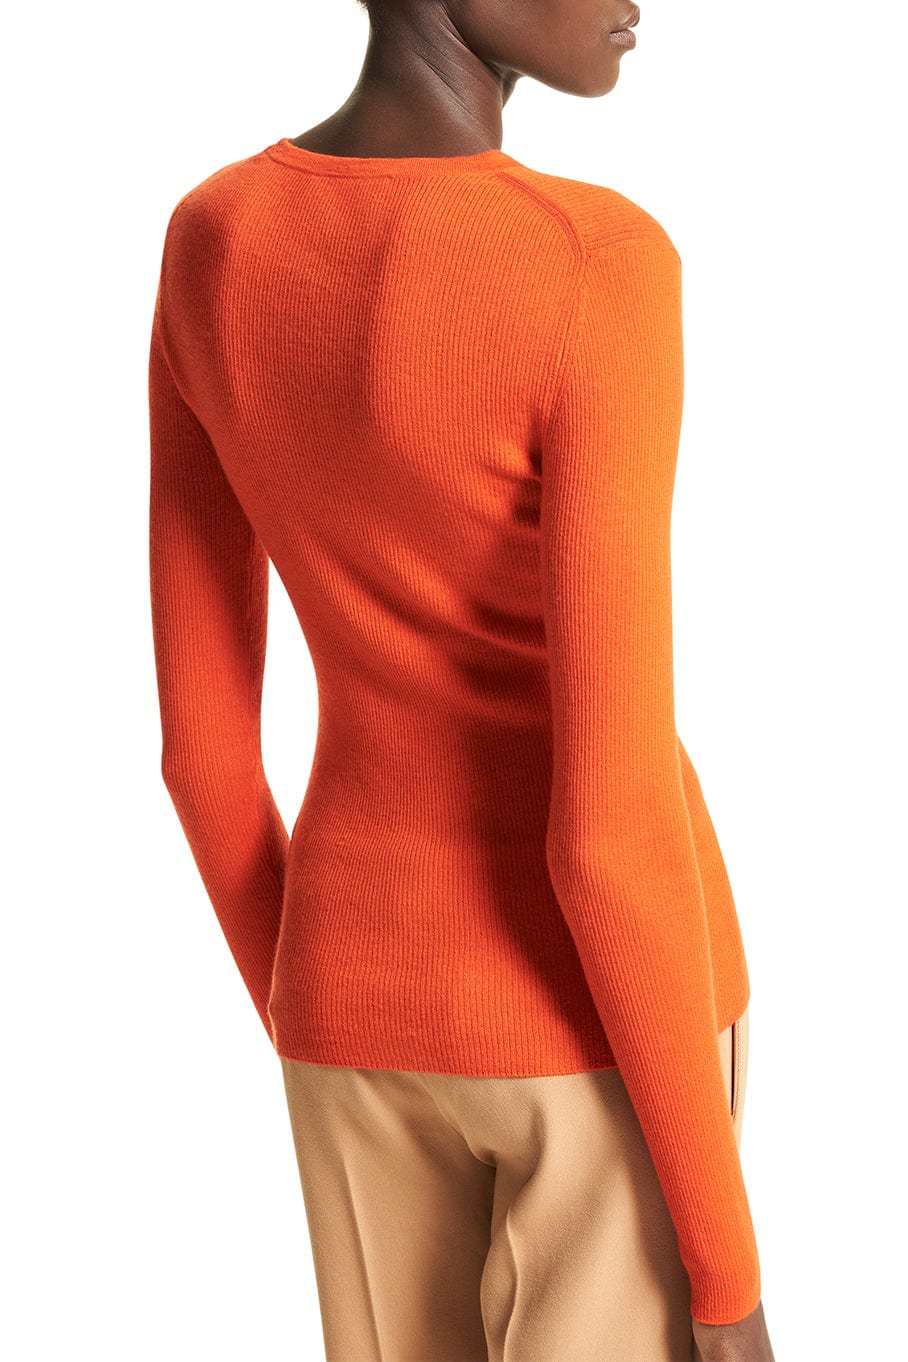 MICHAEL KORS COLLECTION-Hutton Ribbed Crewneck Pull Over - Orange-